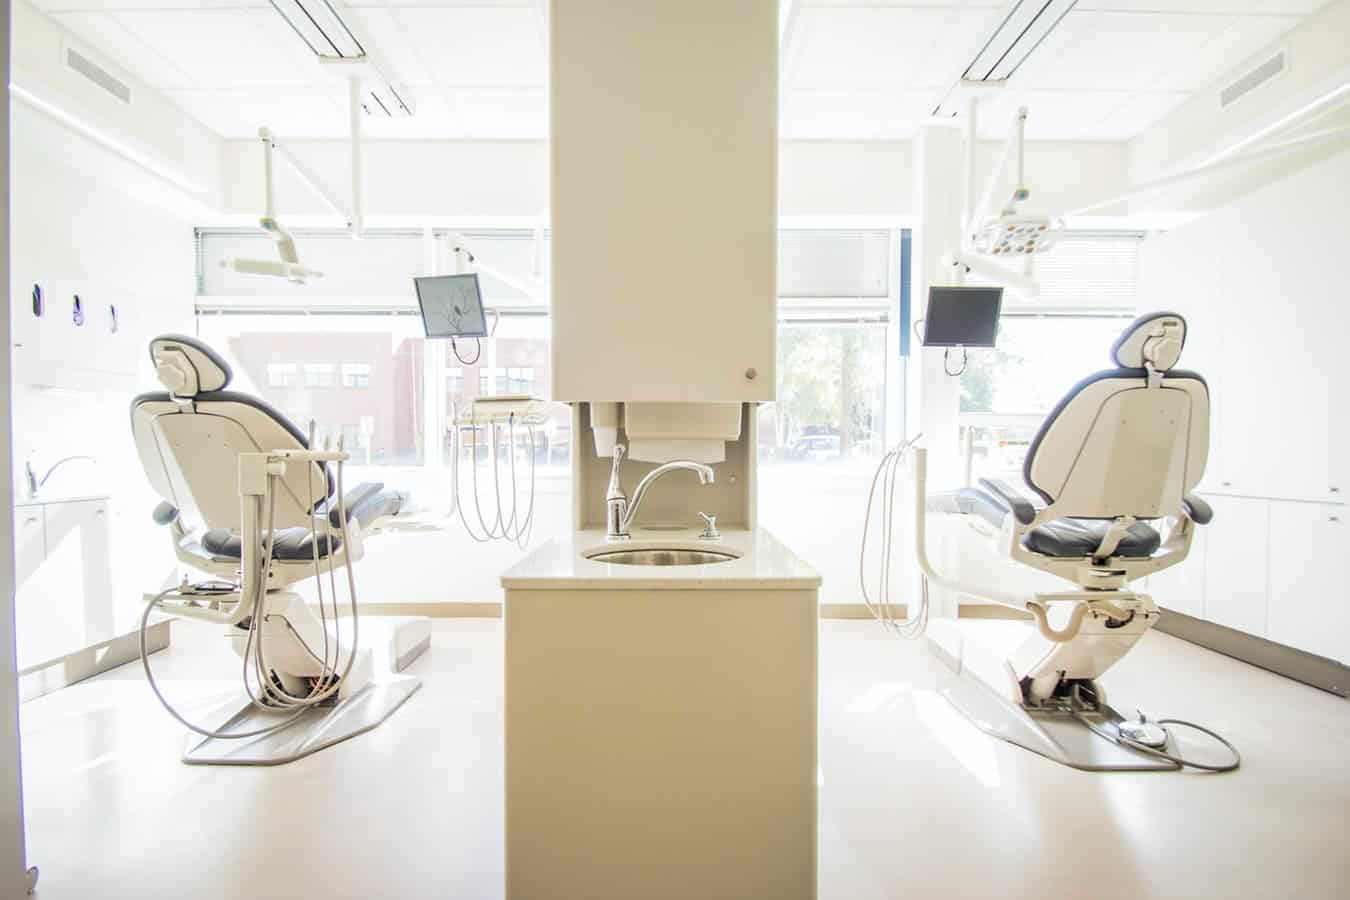 Photo of a dental office